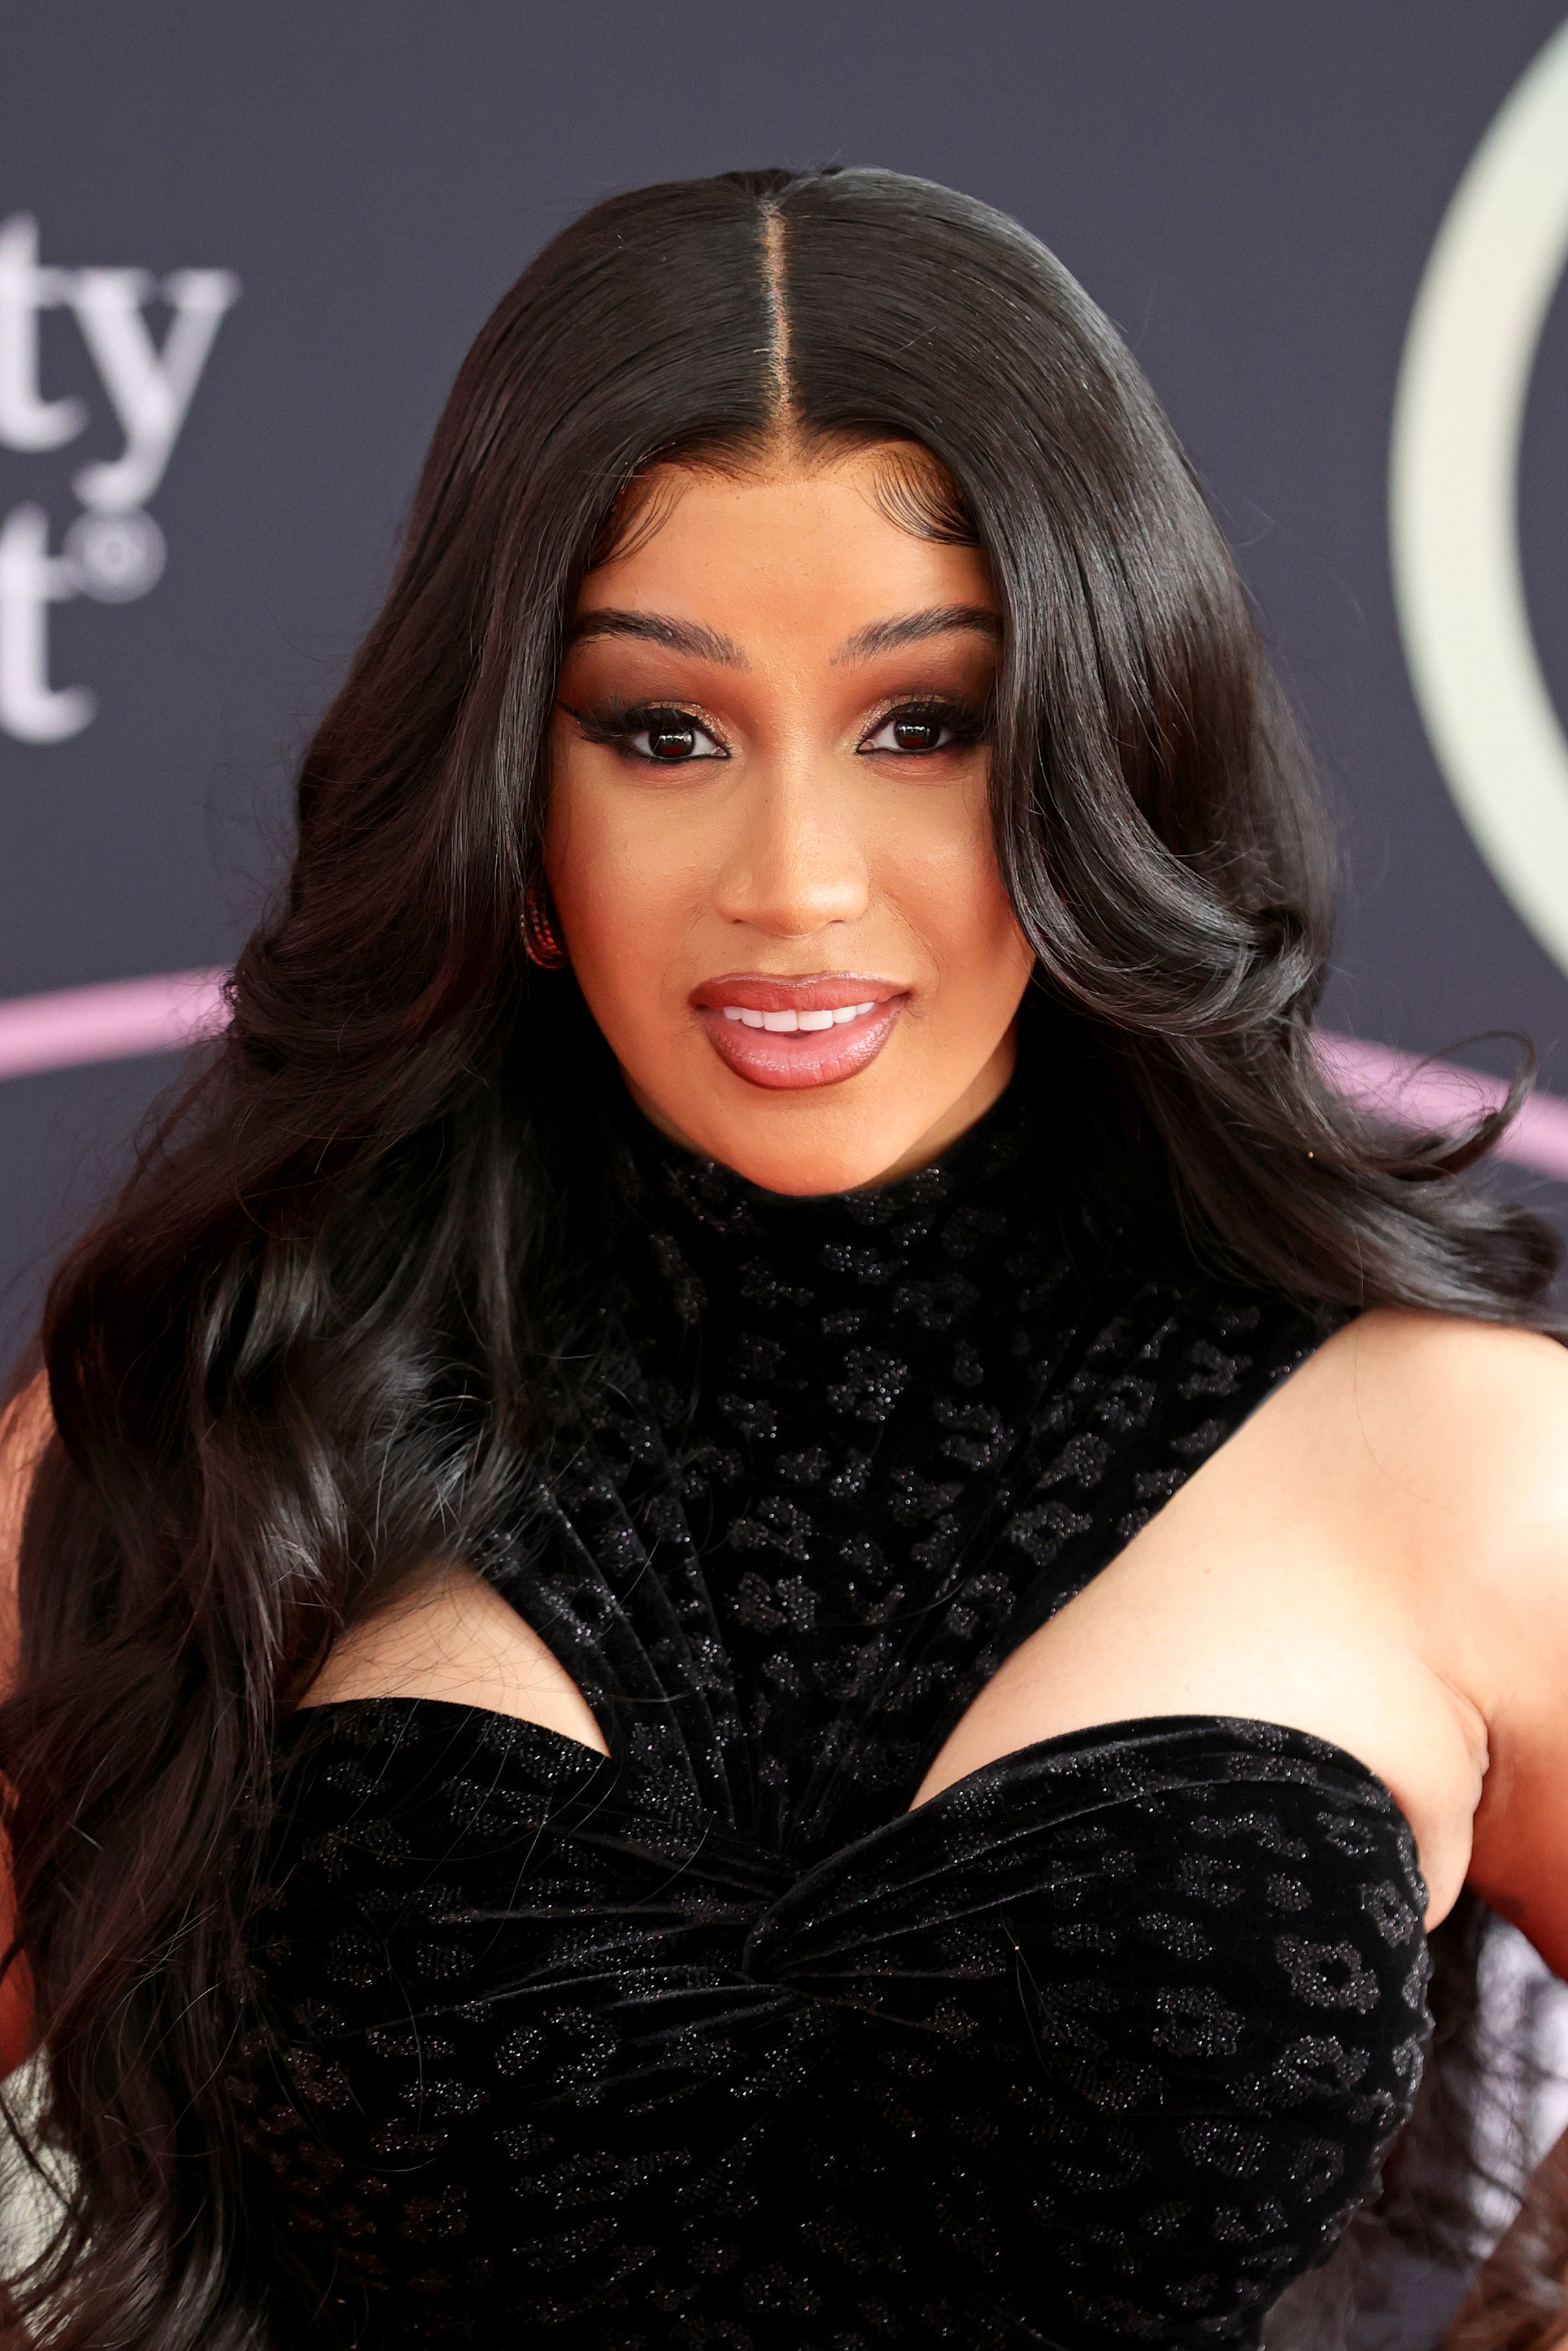 Cardi B poses on the American Music Awards red carpet